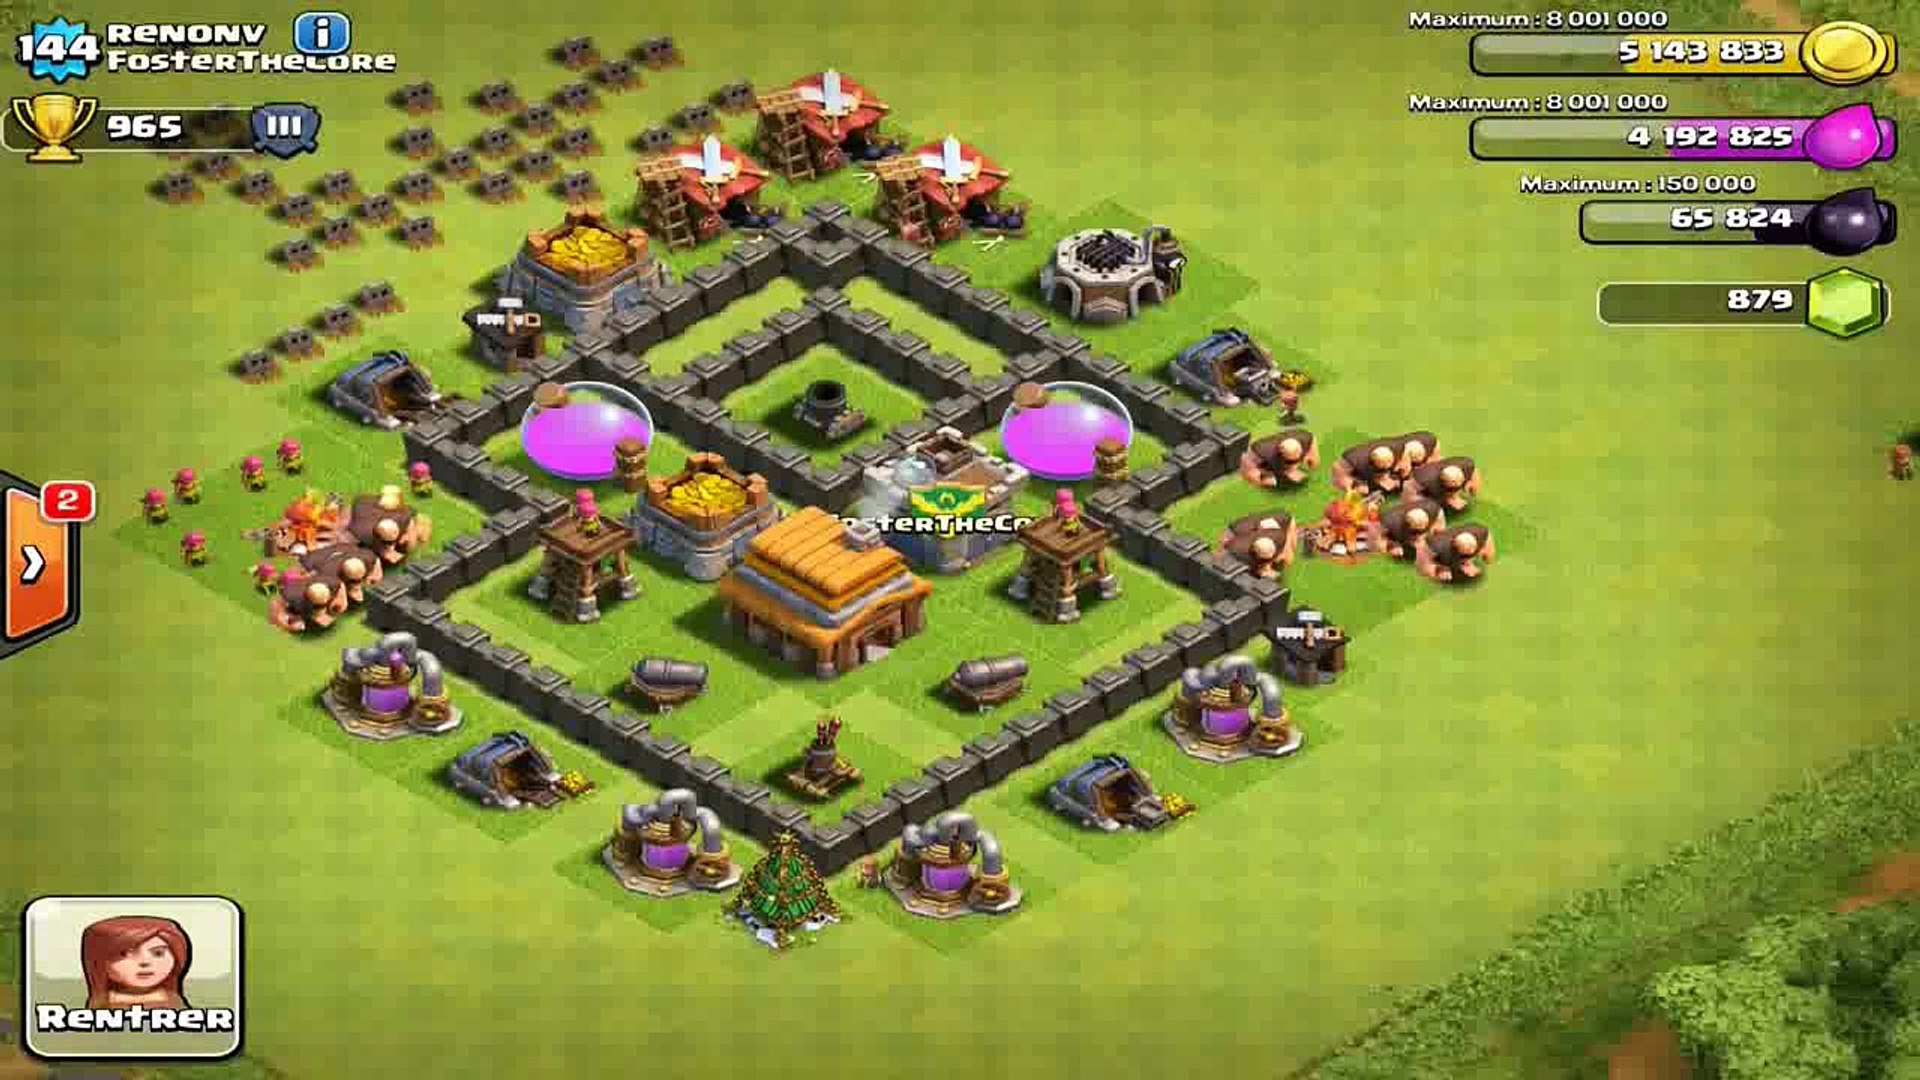 Un Hdv 4 lvl 144 ! Incroyable record clash of clans ! - video Dailymotion